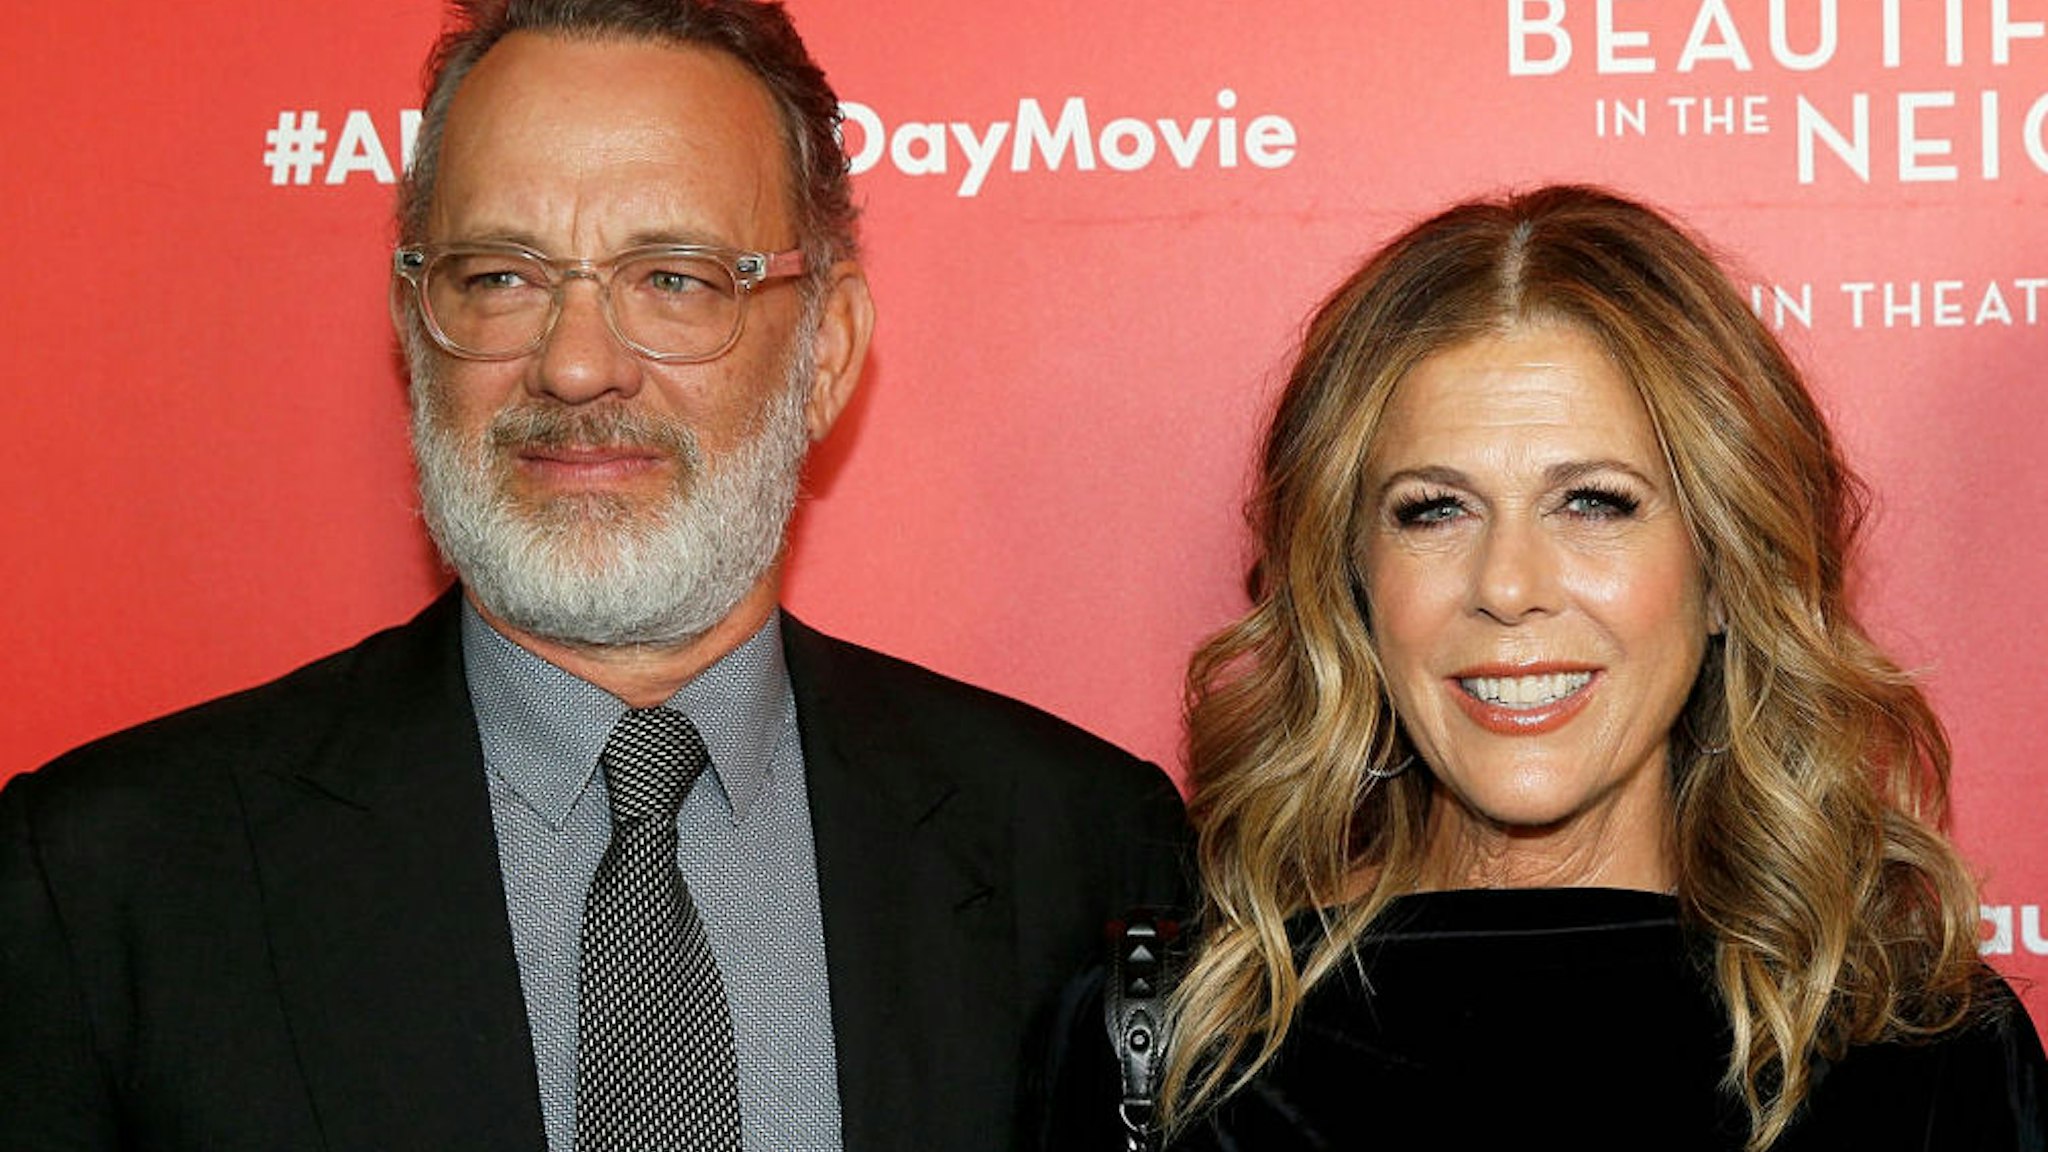 Tom Hanks and Rita Wilson attend "A Beautiful Day In The Neighborhood" New York Screening at Henry R. Luce Auditorium at Brookfield Place on November 17, 2019 in New York City.